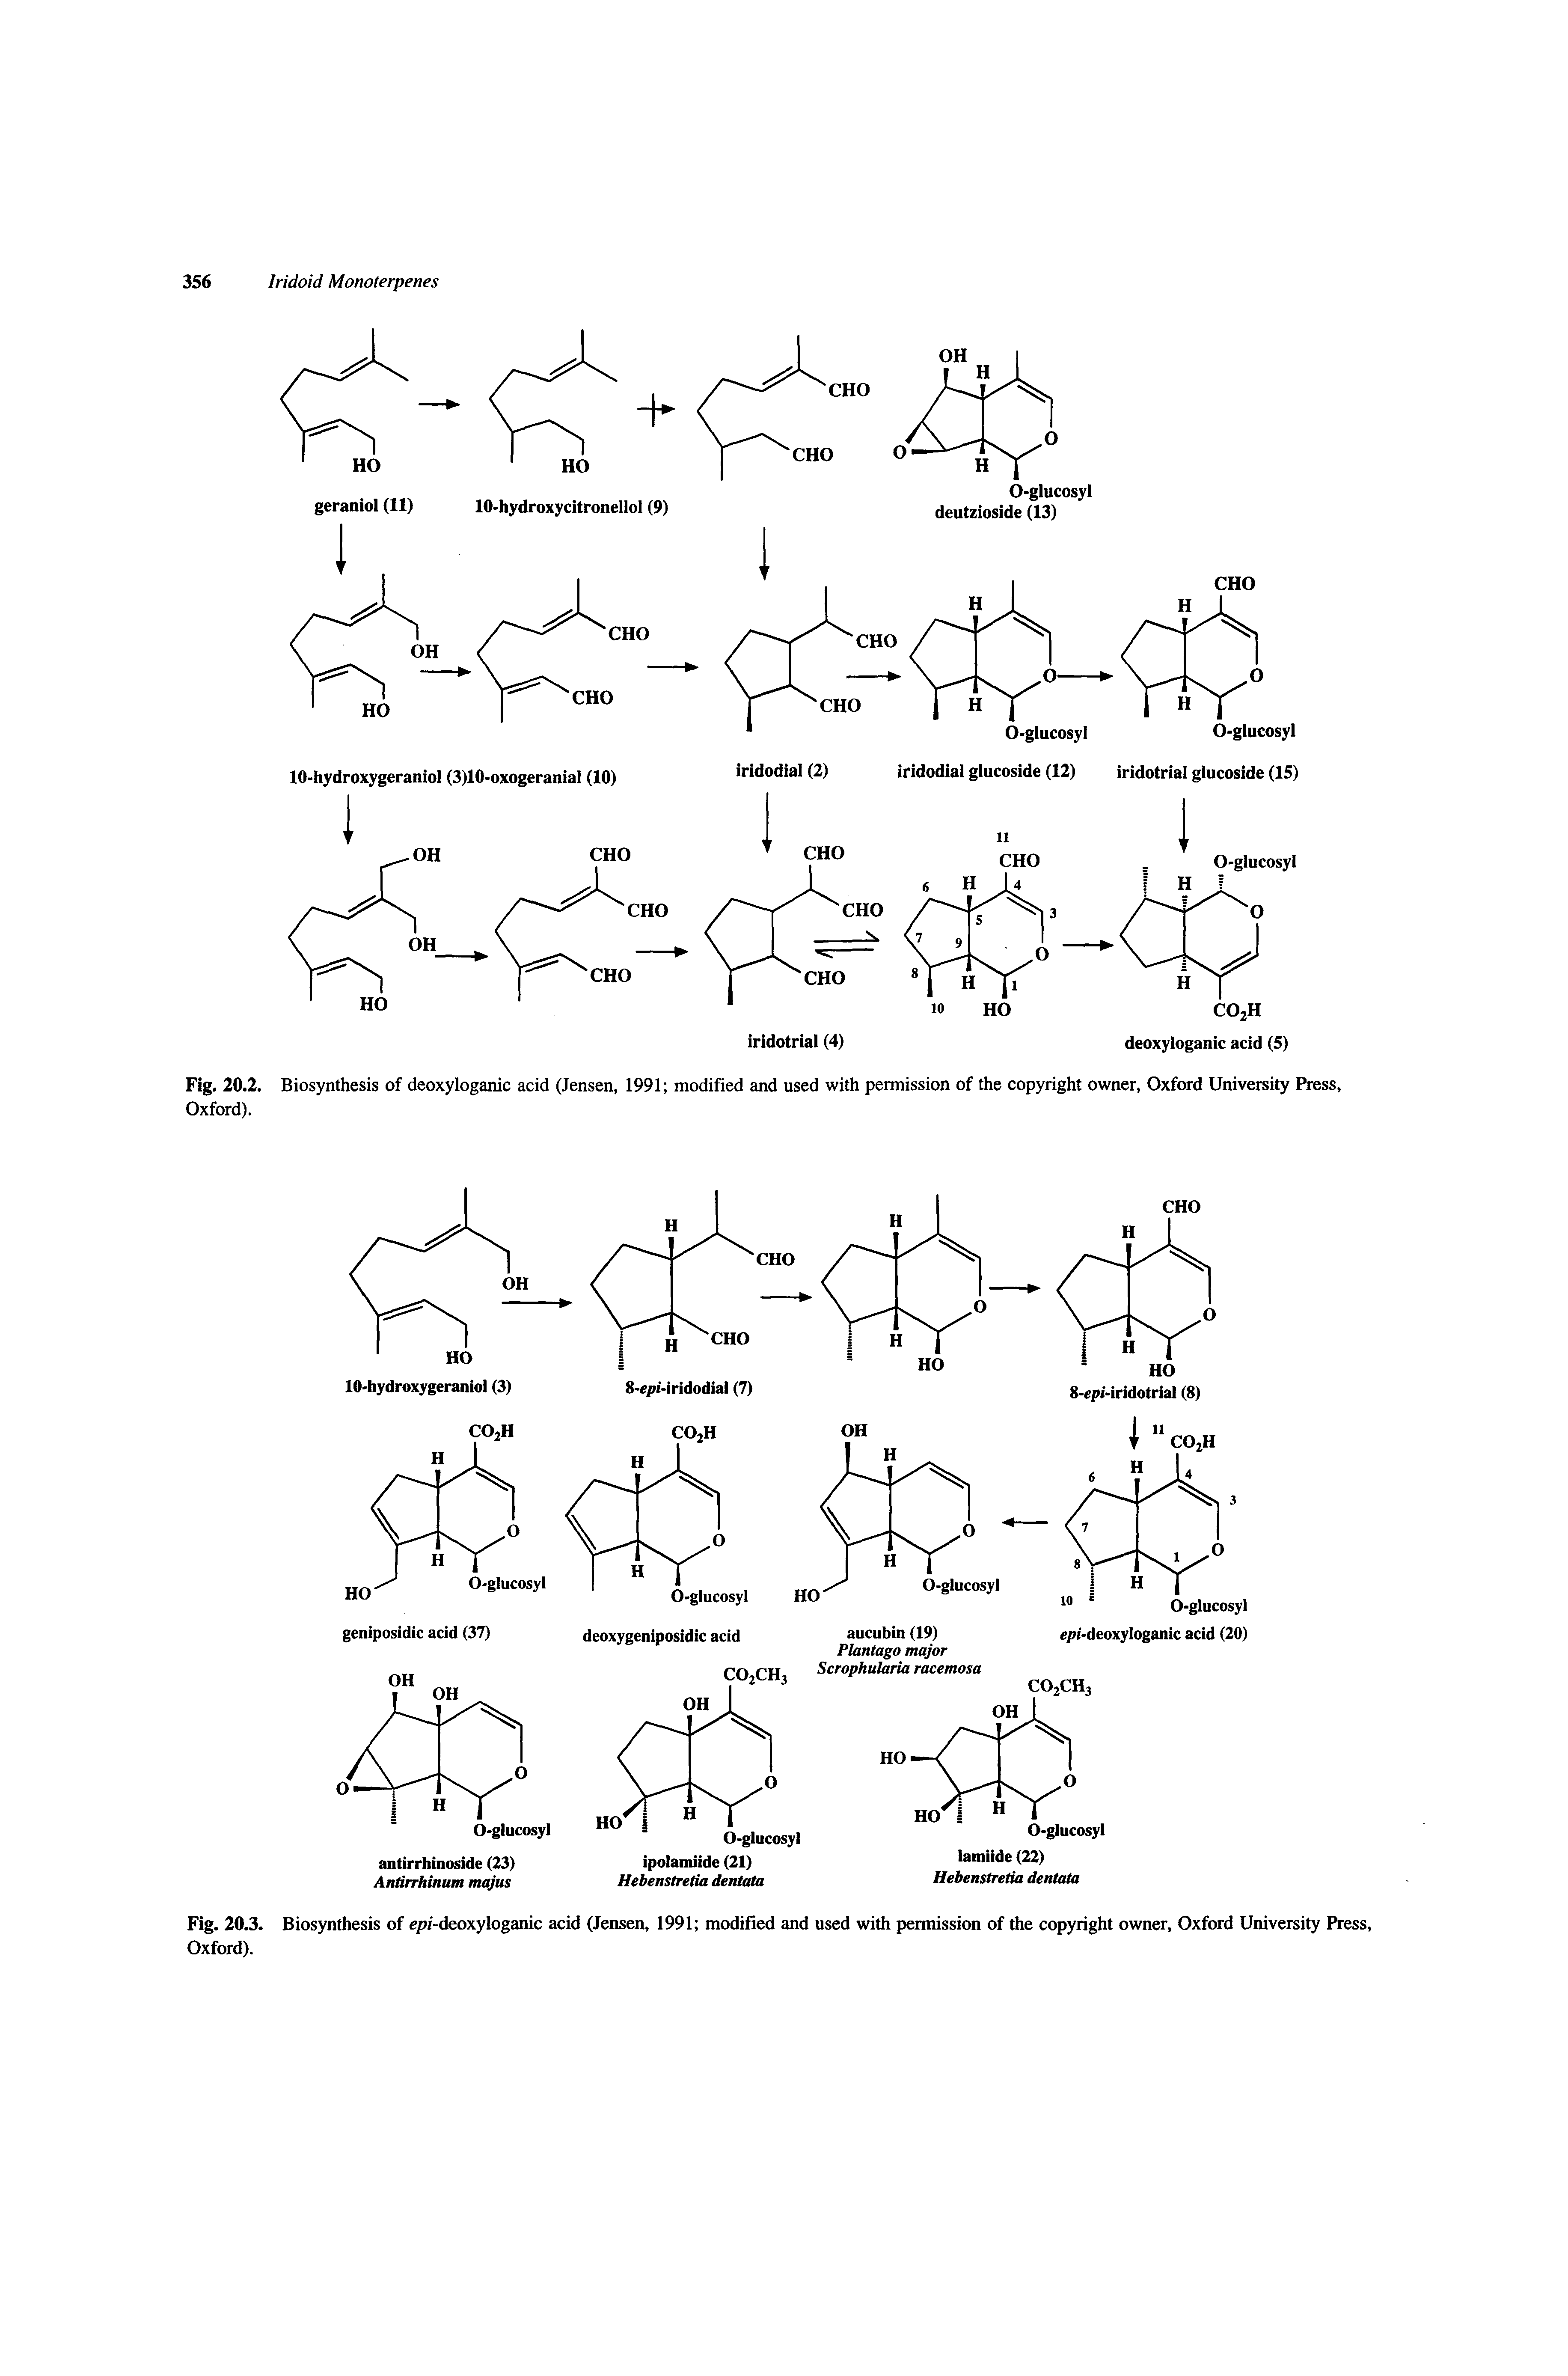 Fig. 20.2. Biosynthesis of deoxyloganic acid (Jensen, 1991 modified and used with permission of the copyright owner, Oxford University Press, Oxford).